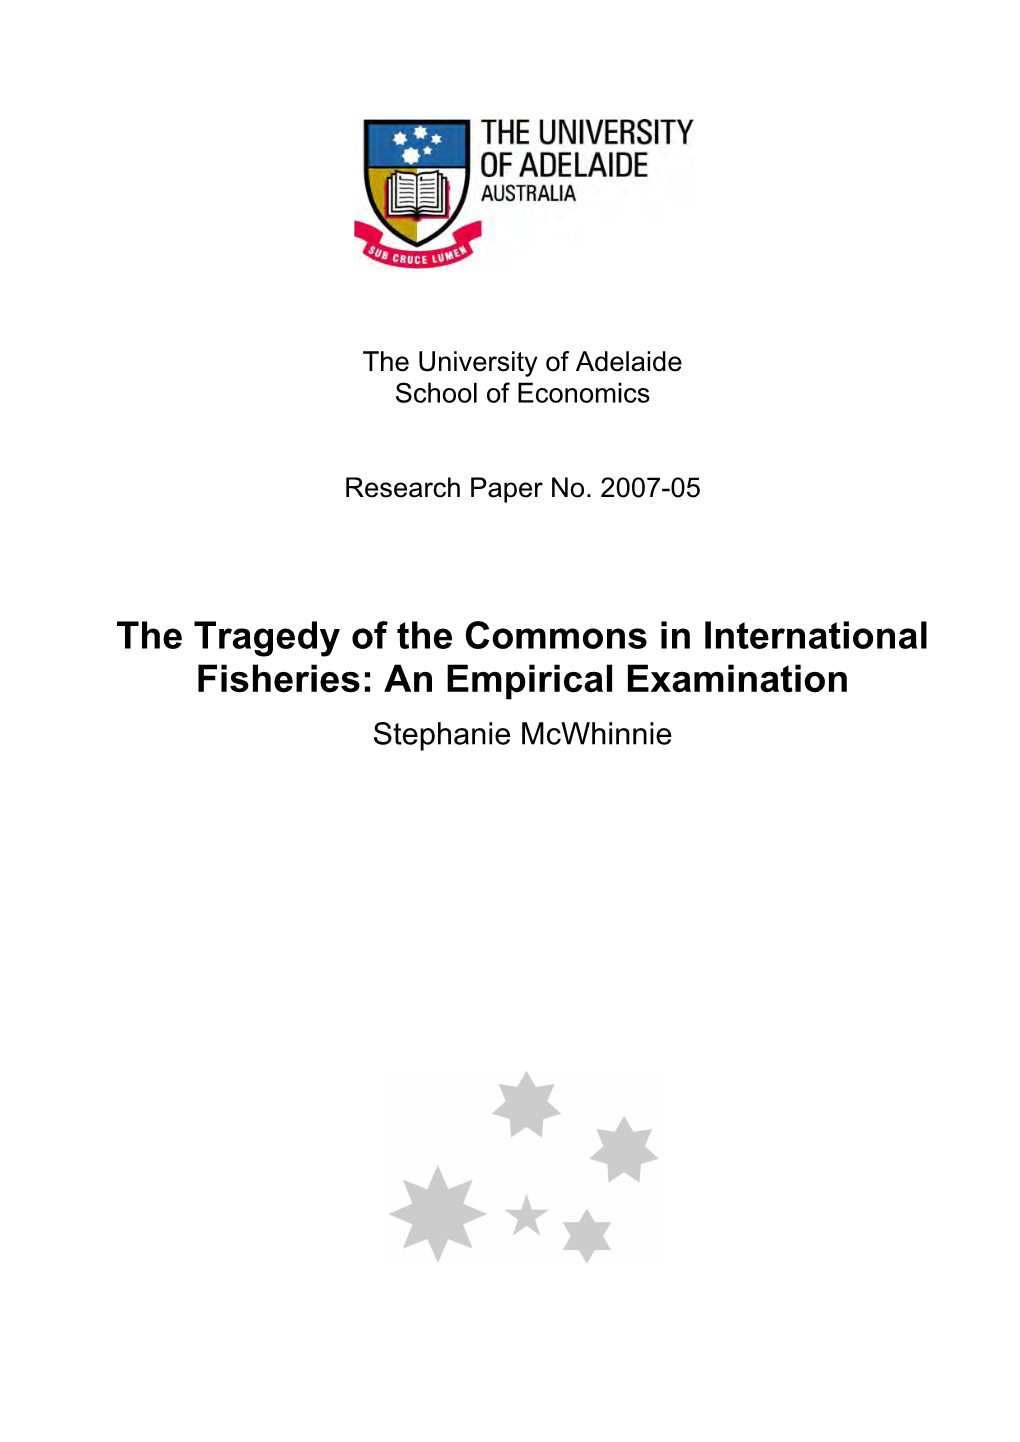 The Tragedy of the Commons in International Fisheries: an Empirical Examination